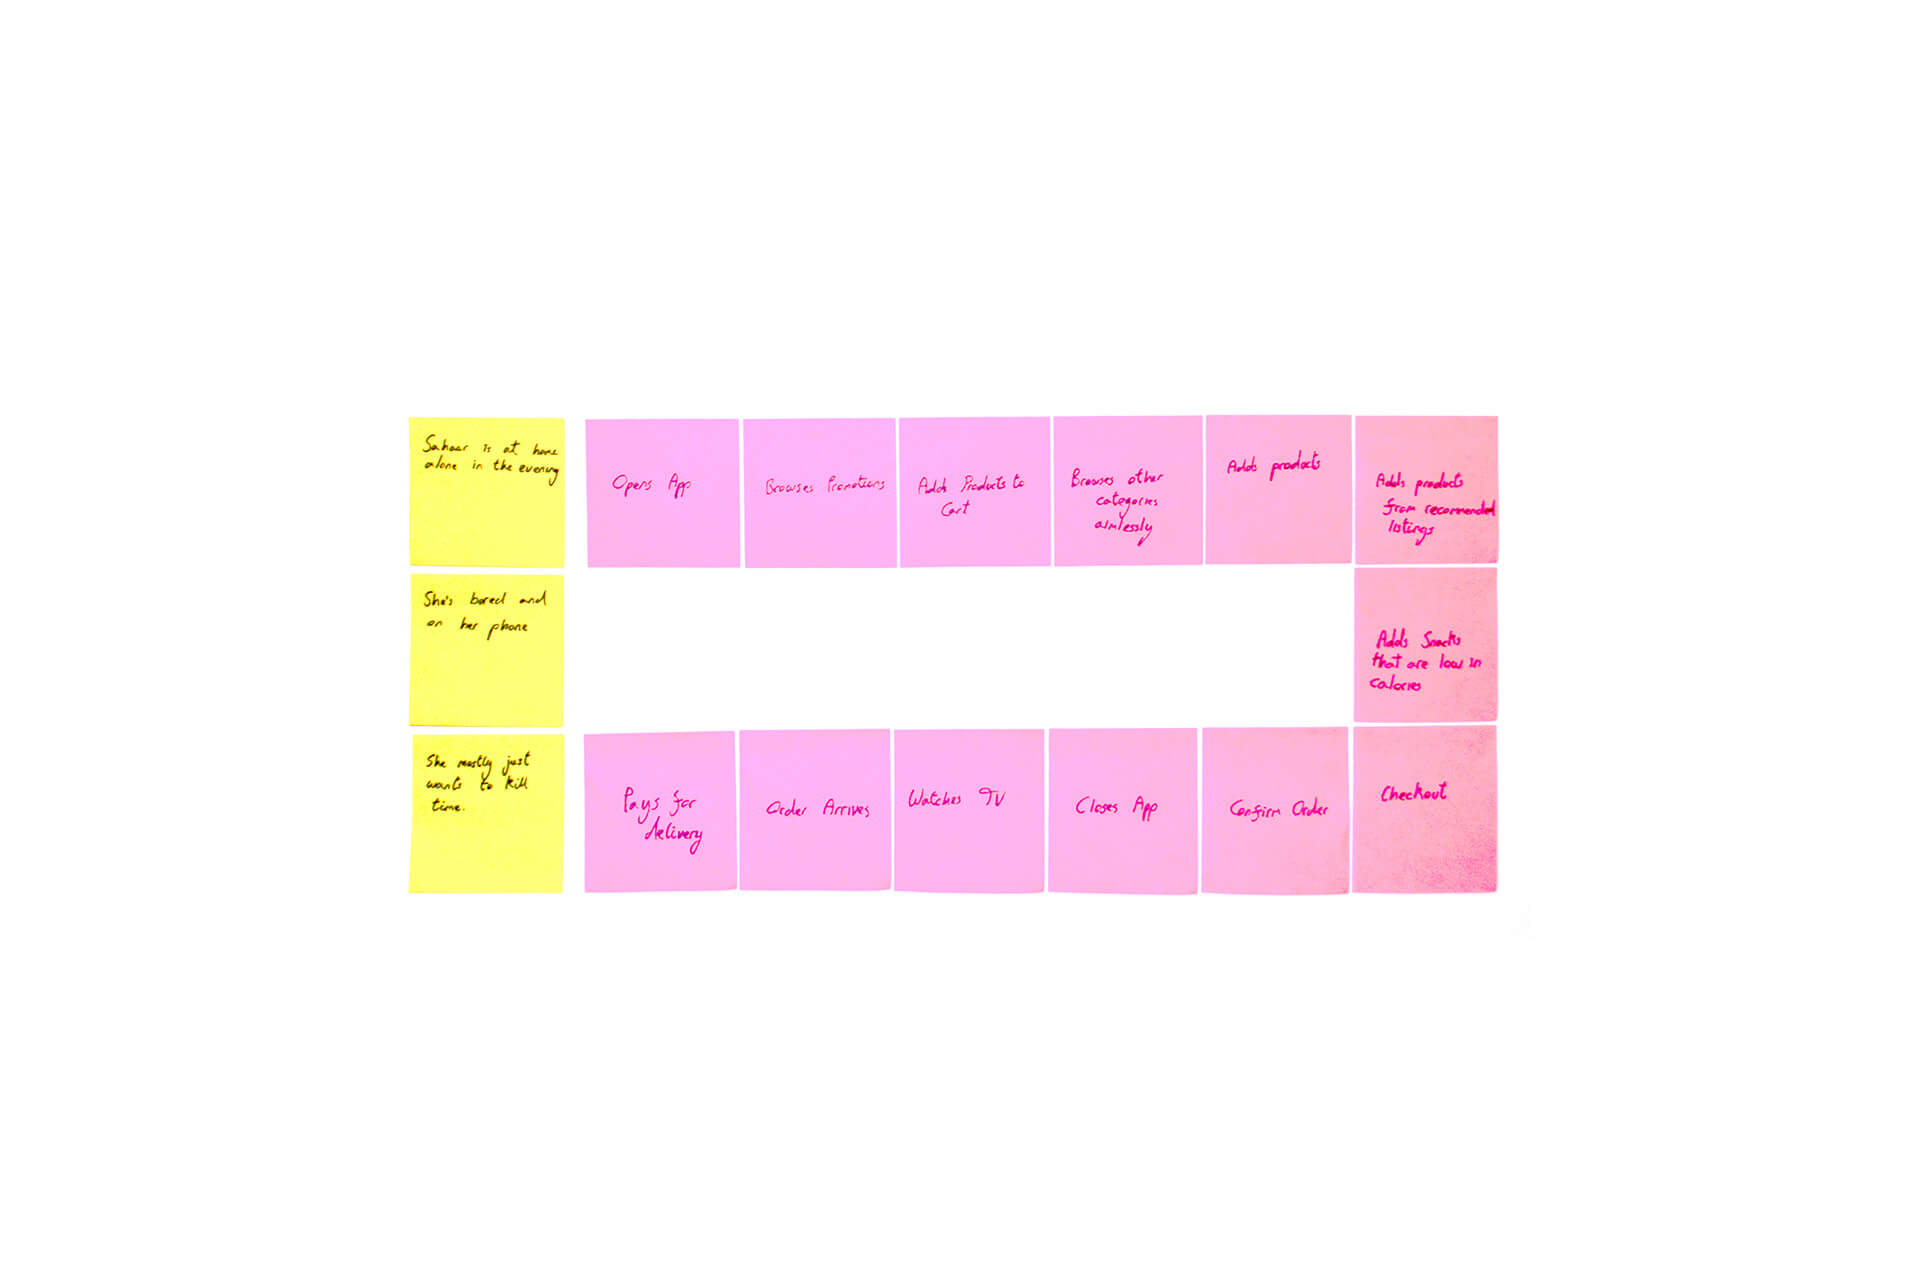 UX User Journey Map for the Persona Sahaar